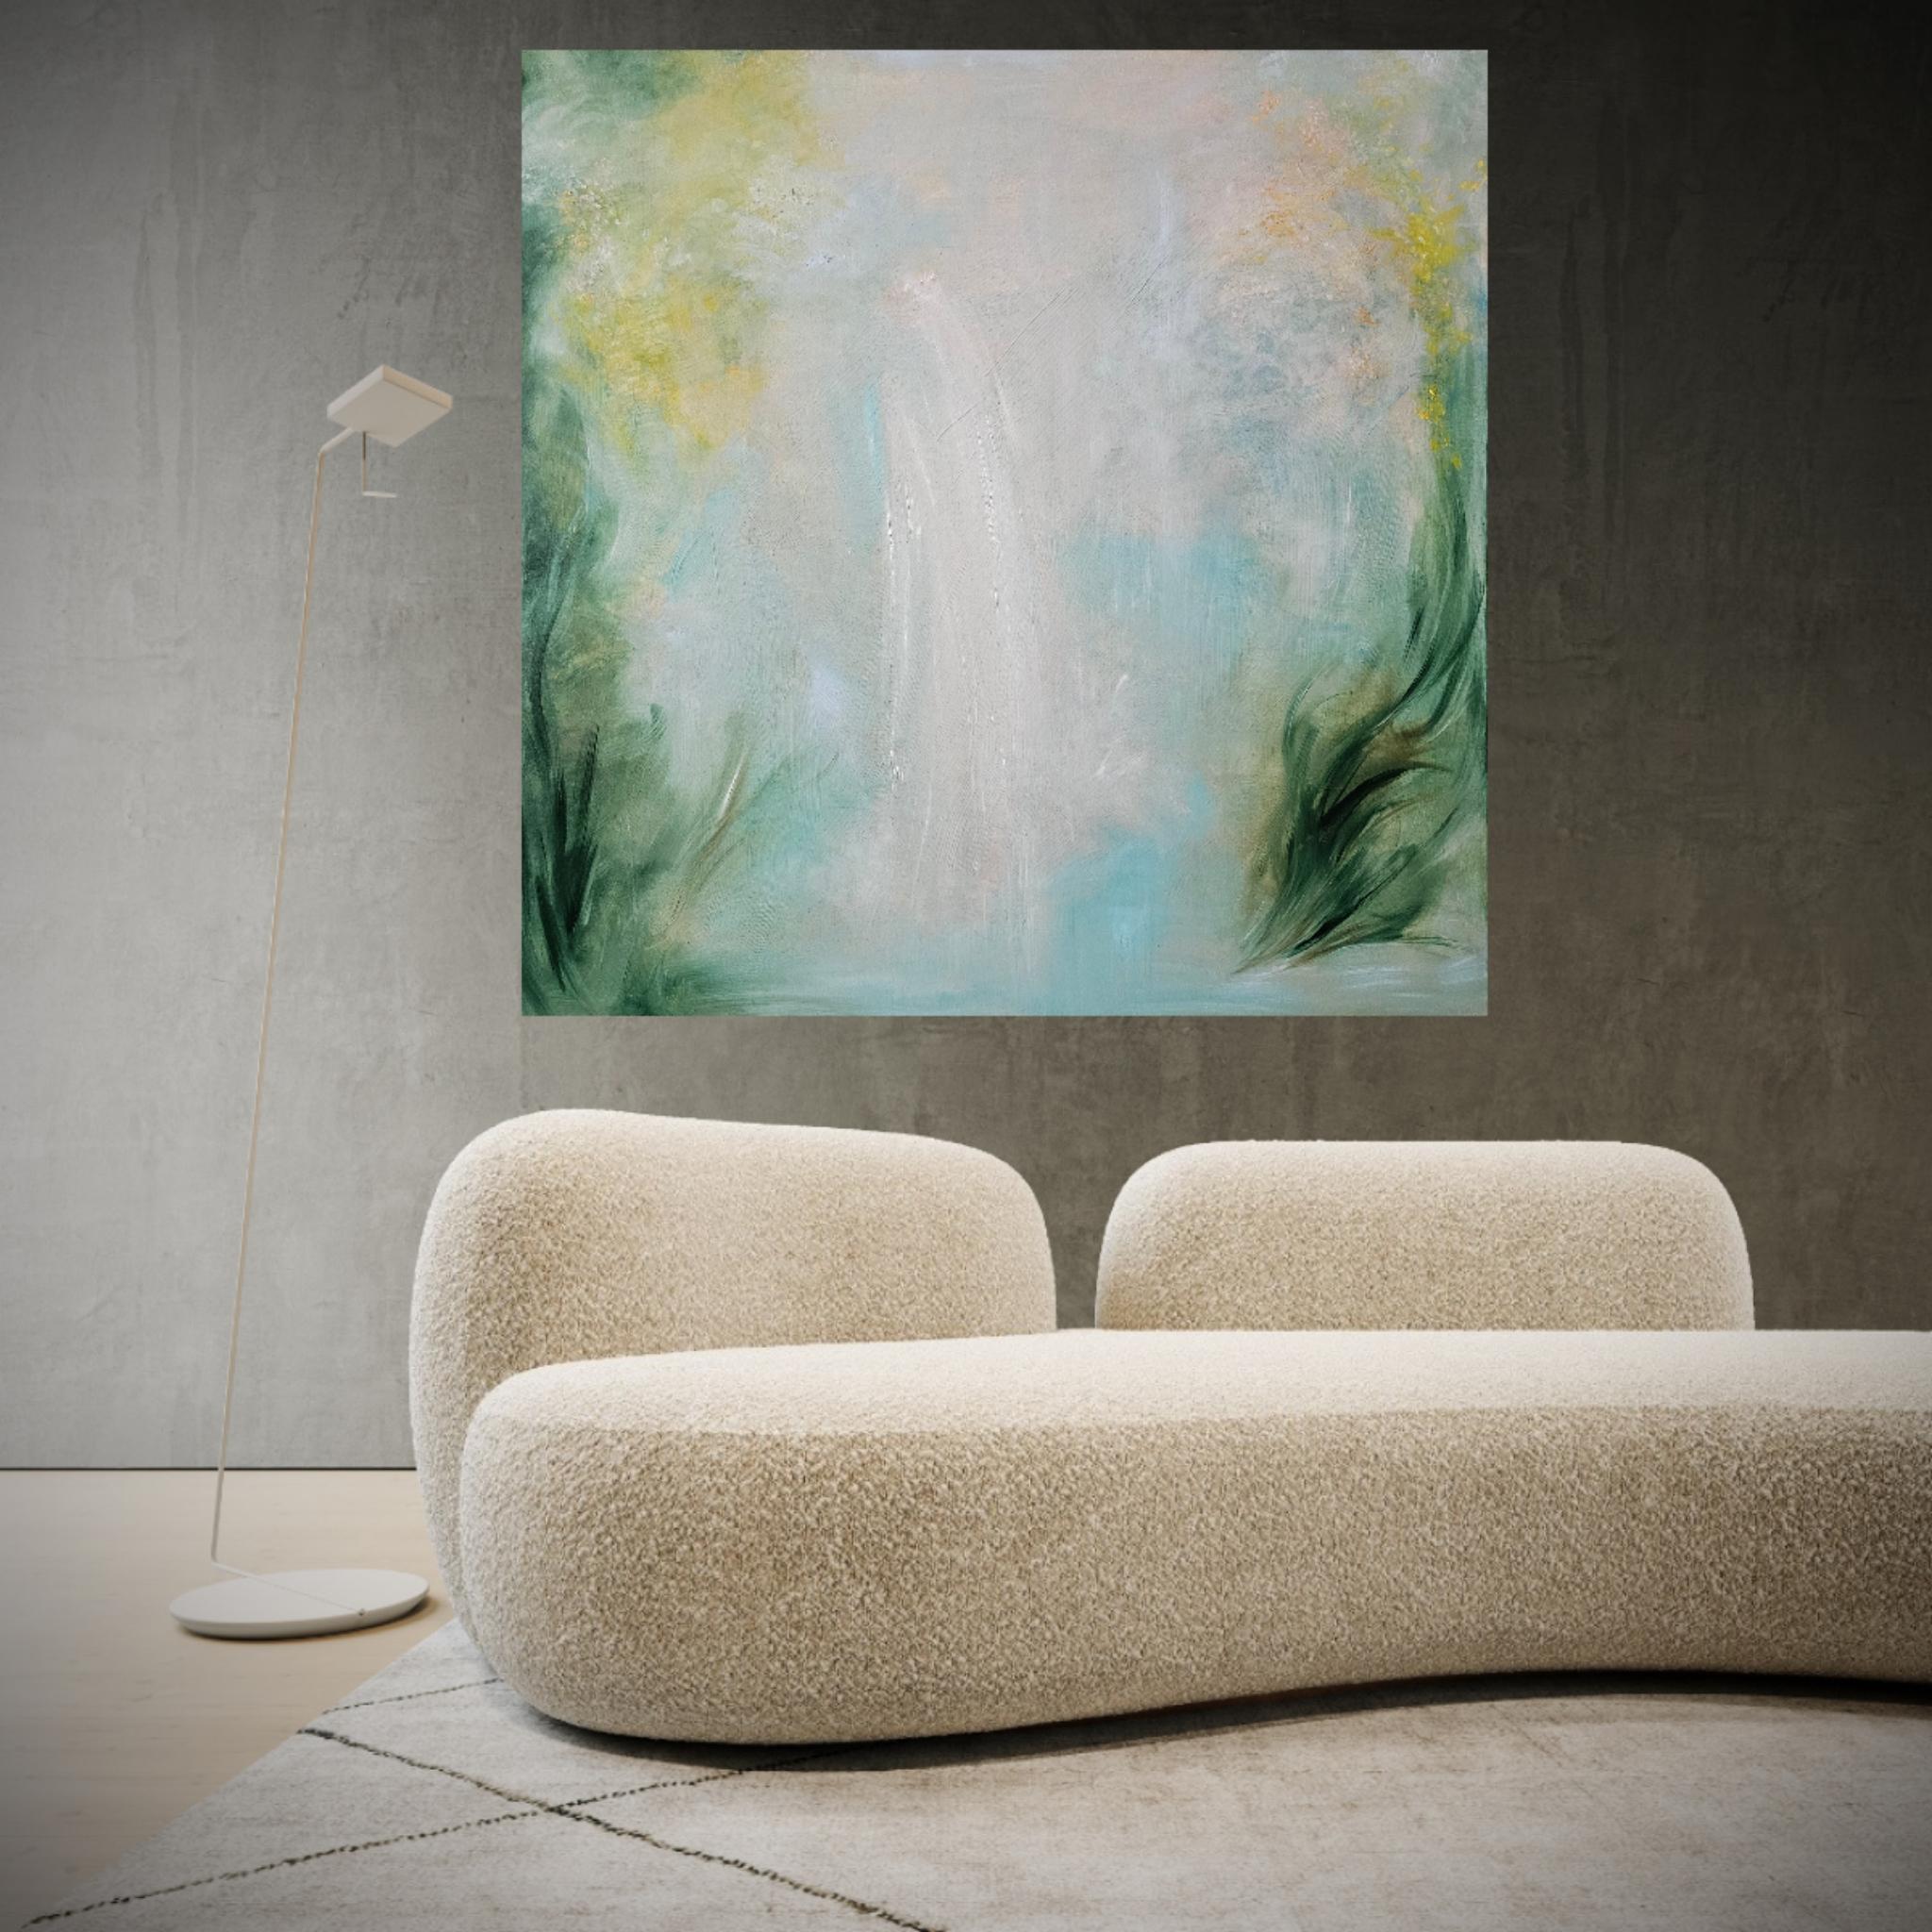 The Dreamer - Ethereal abstract landscape painting For Sale 11